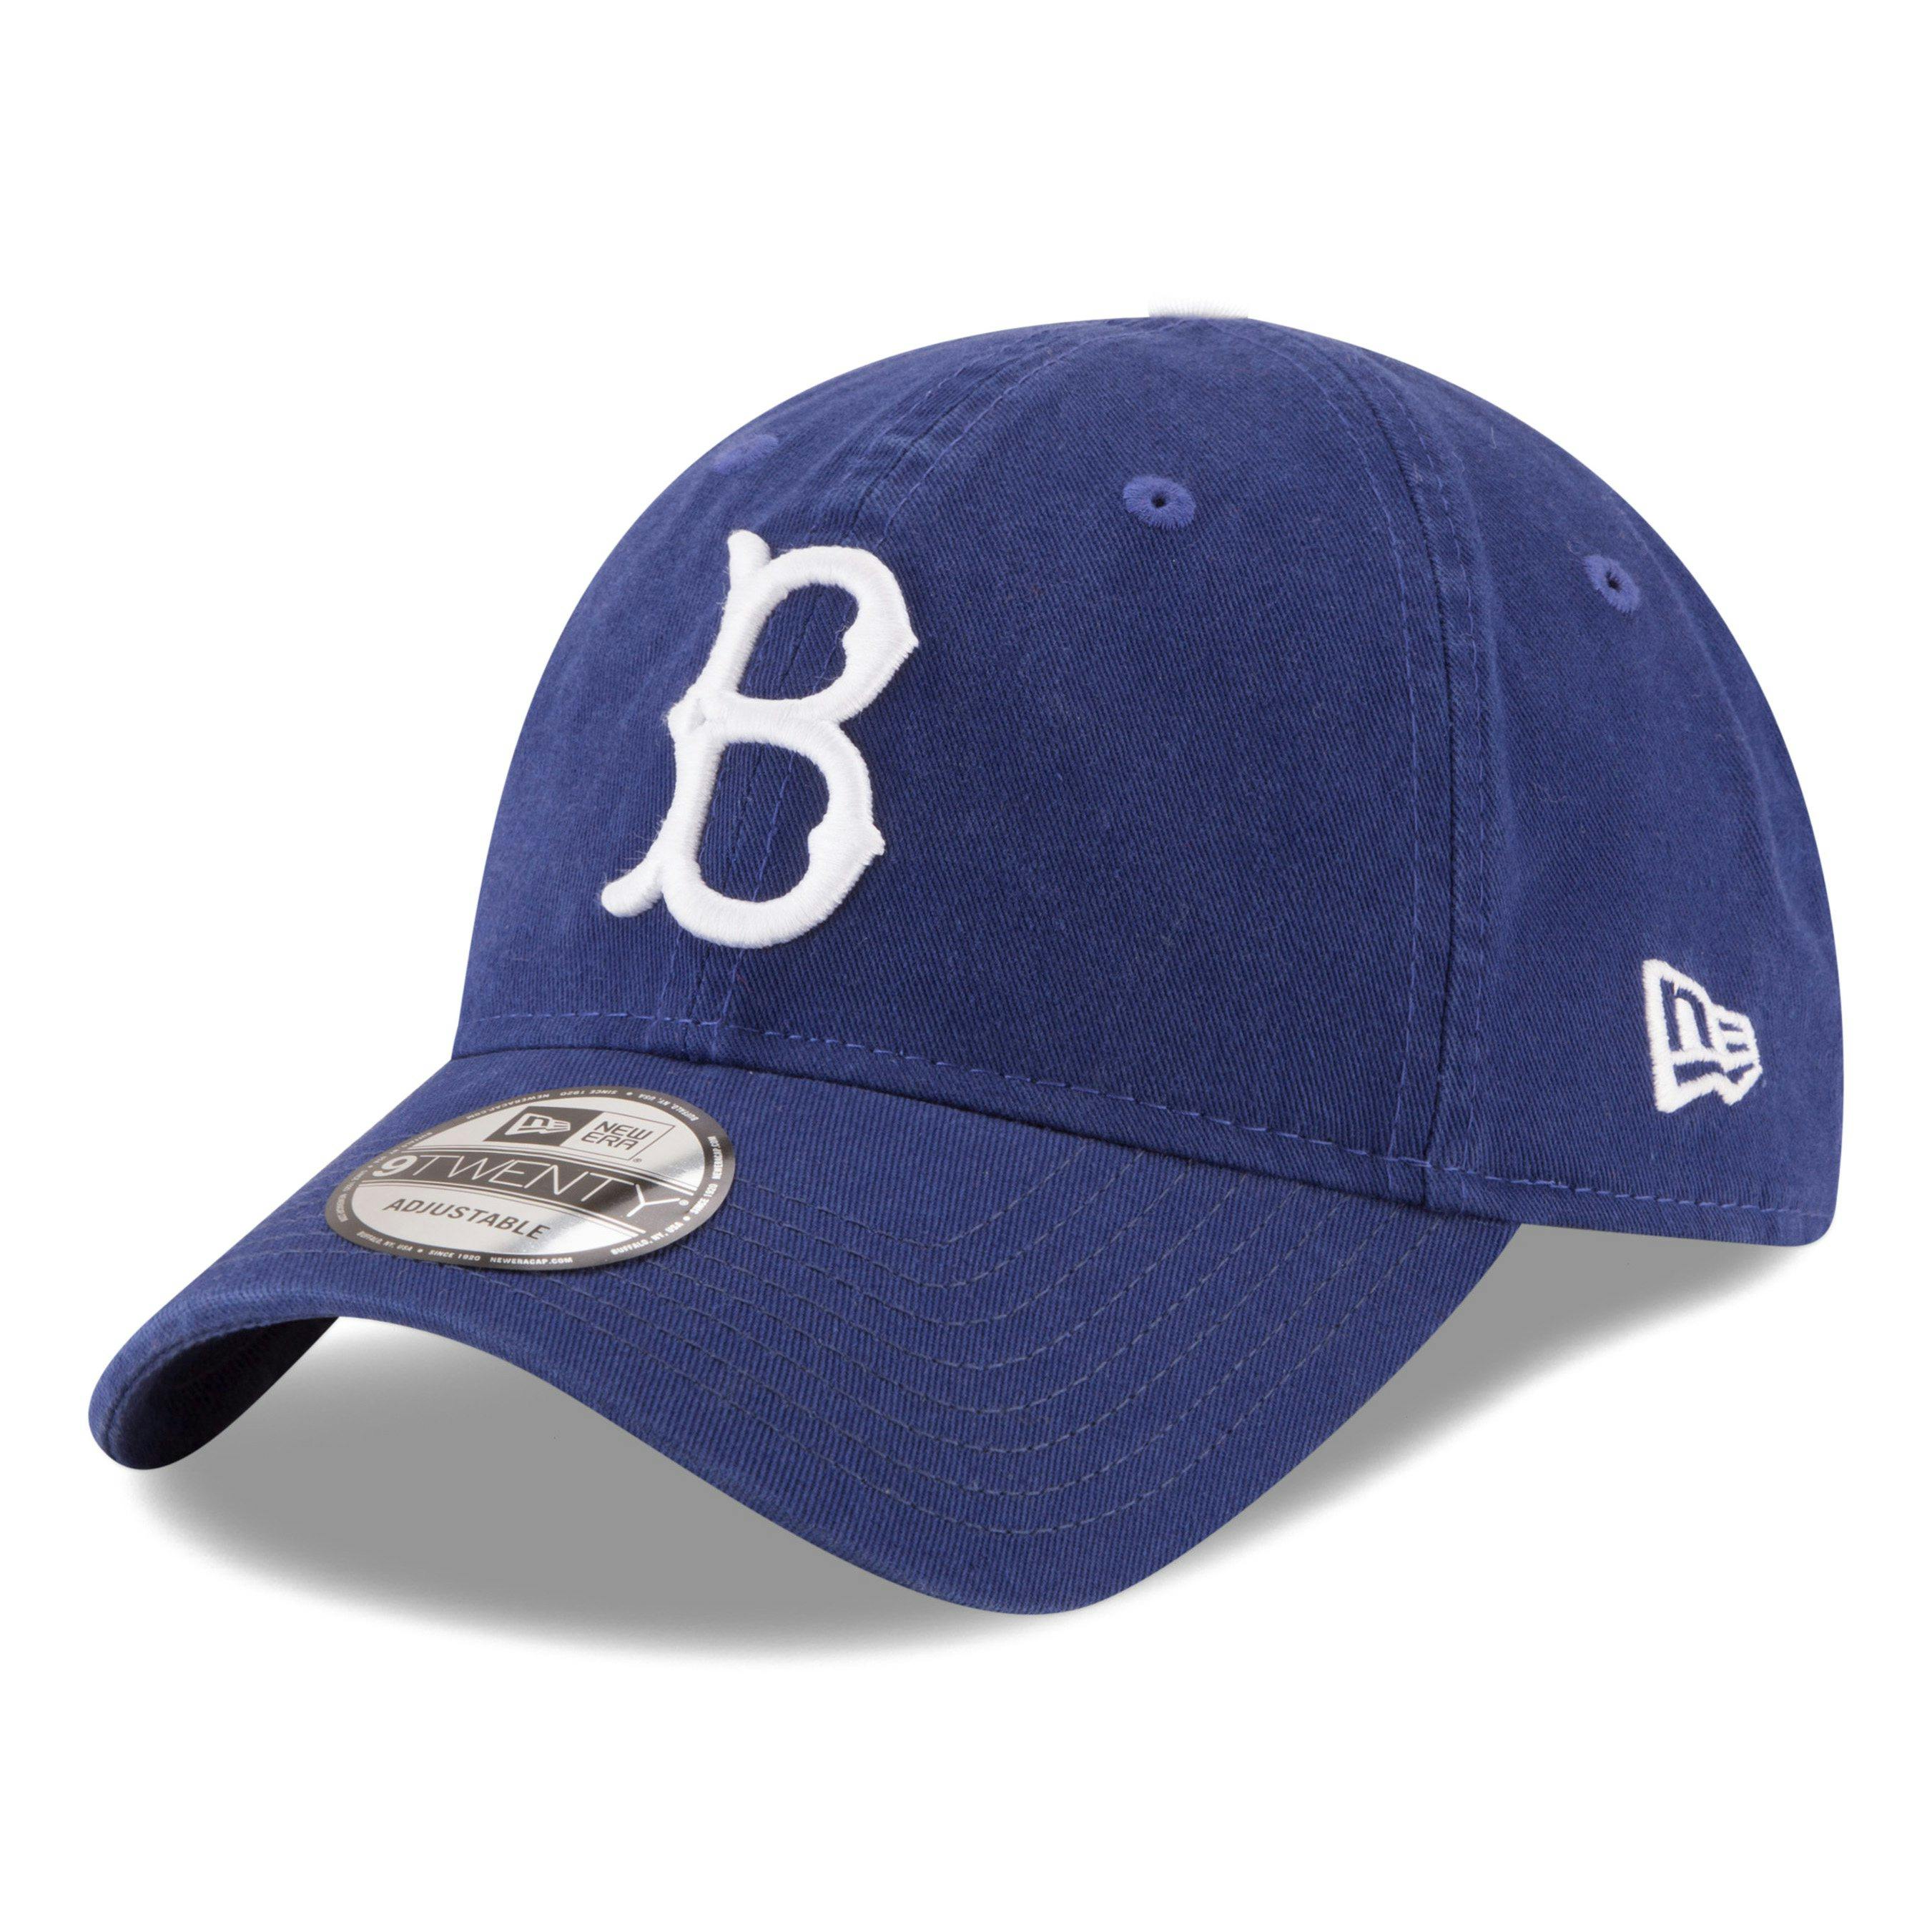 A Brief History of the Ballcap